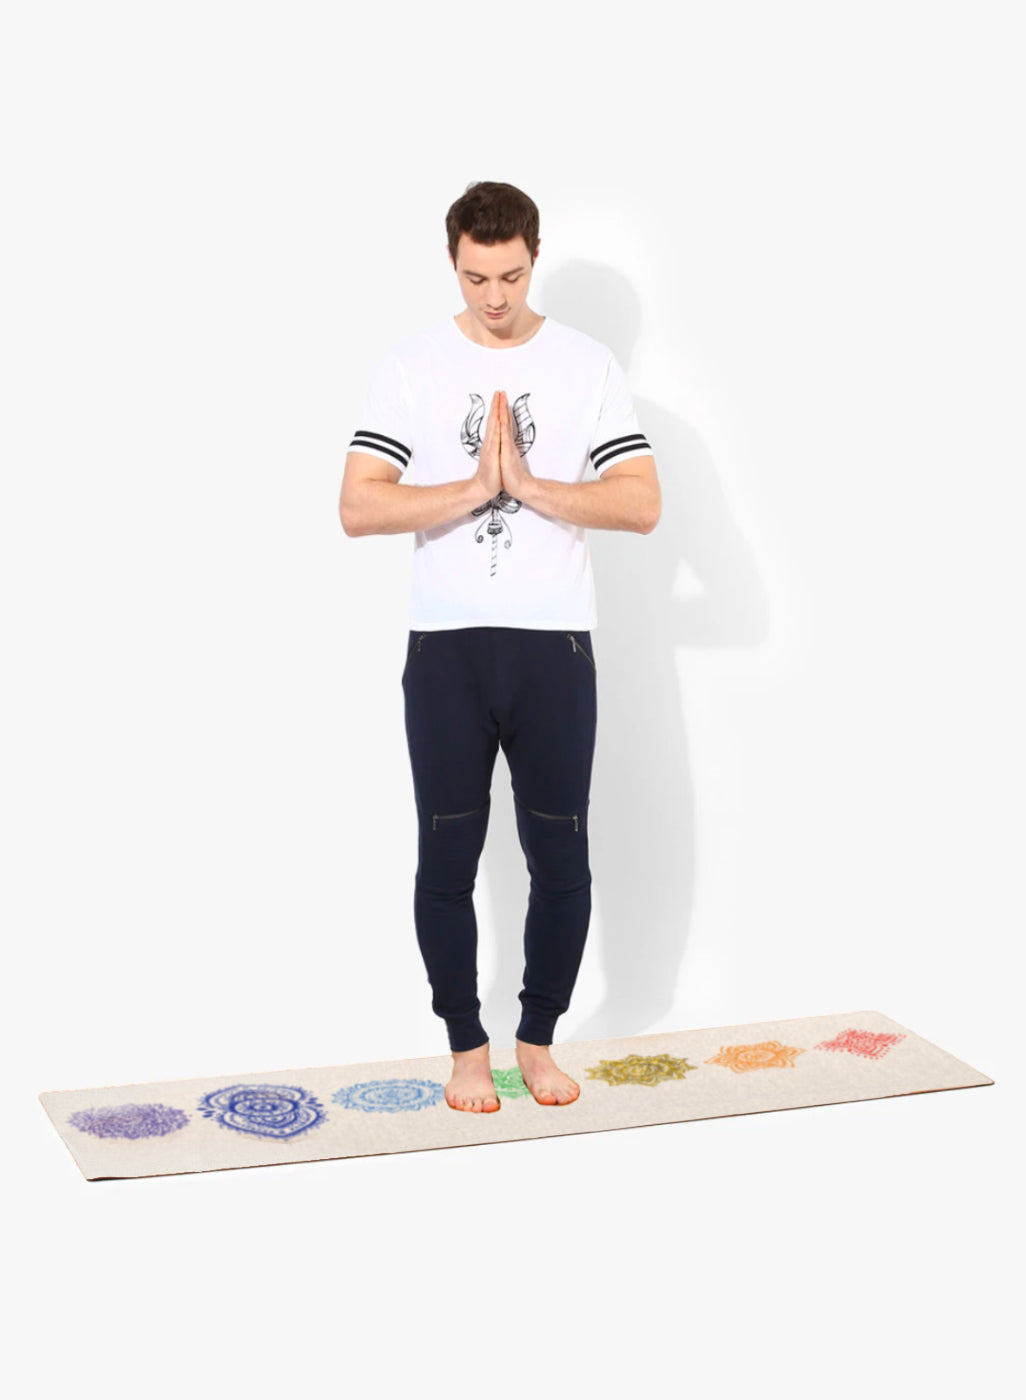 Shakti Warrior Chakra Design Hemp Yoga Mat - Immerse in vibrant Chakra symbolism on the best hemp mat. Elevate your practice with natural grip, durability, and transformative energy for an unparalleled yoga journey.